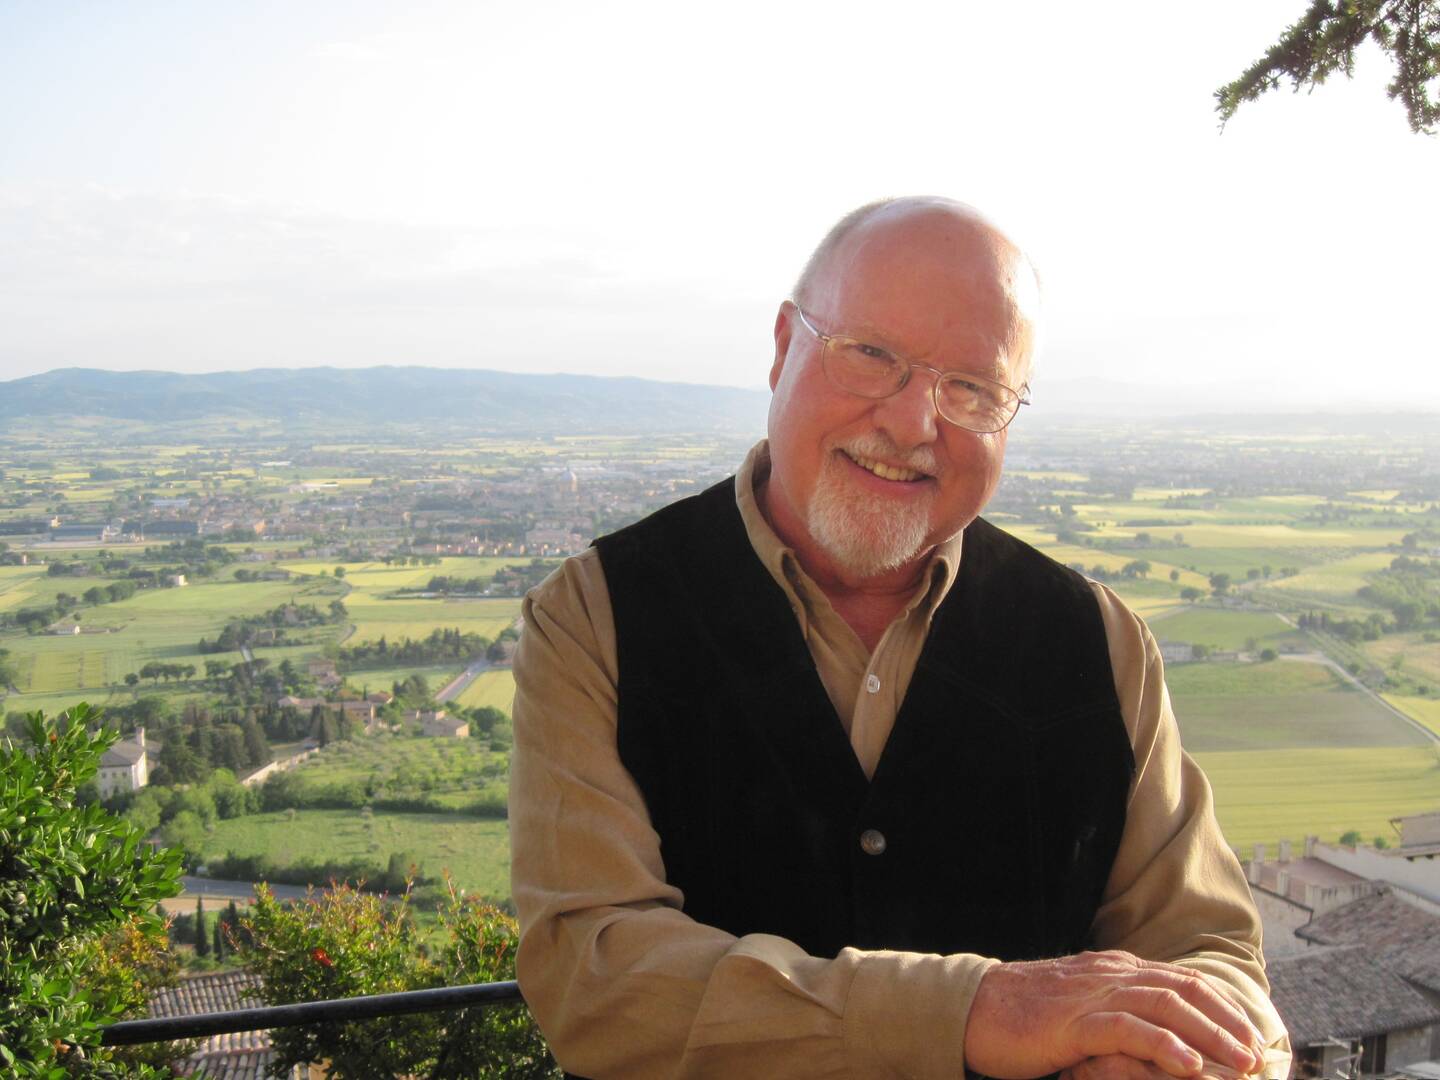 Franciscan Father Richard Rohr is seen in this 2012 photo during a trip to Assisi, Italy, sponsored by the Center for Action and Contemplation in Albuquerque, N.M. Father Rohr will be the first Catholic priest to appear on "Super Soul Sunday,” which runs on the Oprah Winfrey Network. (CNS photo courtesy of Franciscan Media) See ROHR Feb. 2, 2015.